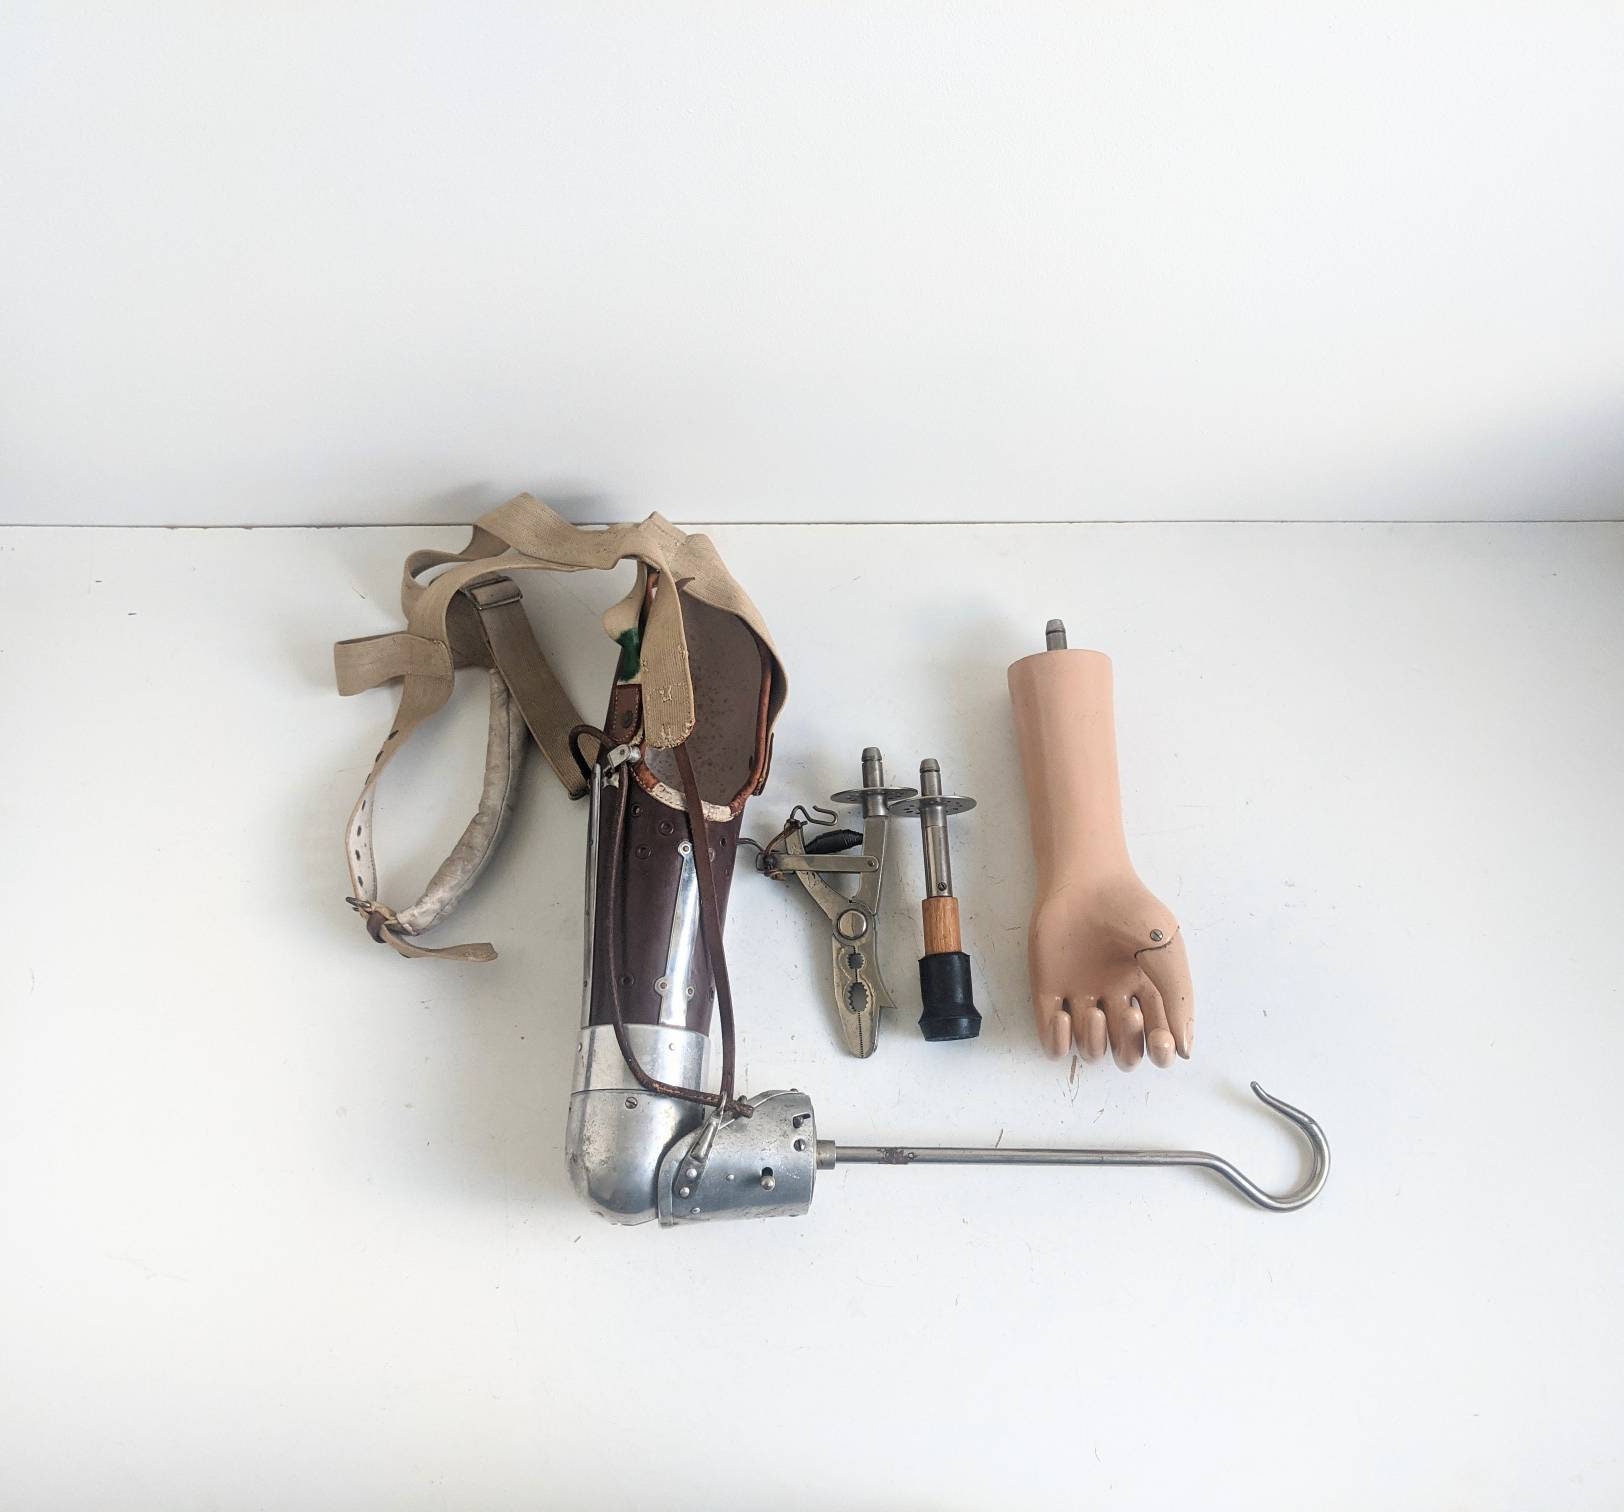 Rare Antique Arm Prosthesis With A Set of Attachments -  Ireland